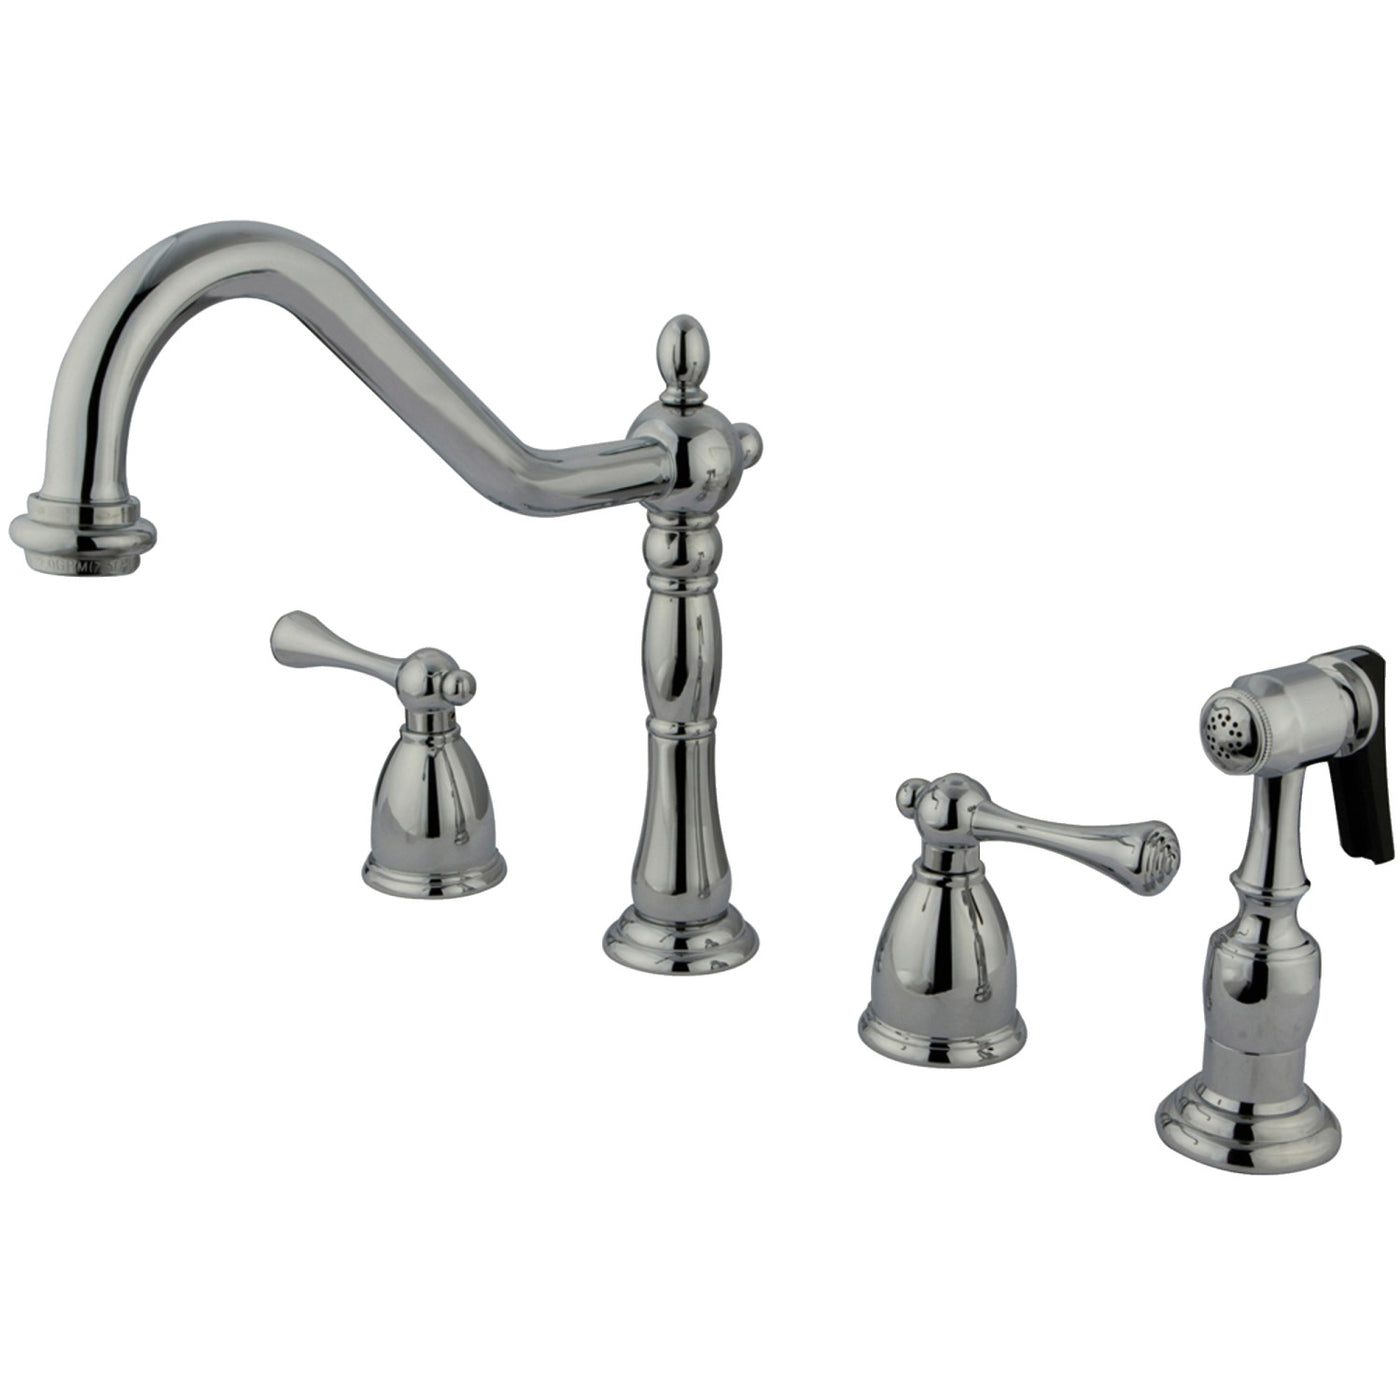 Elements of Design EB7791BLBS Widespread Kitchen Faucet with Brass Sprayer, Polished Chrome